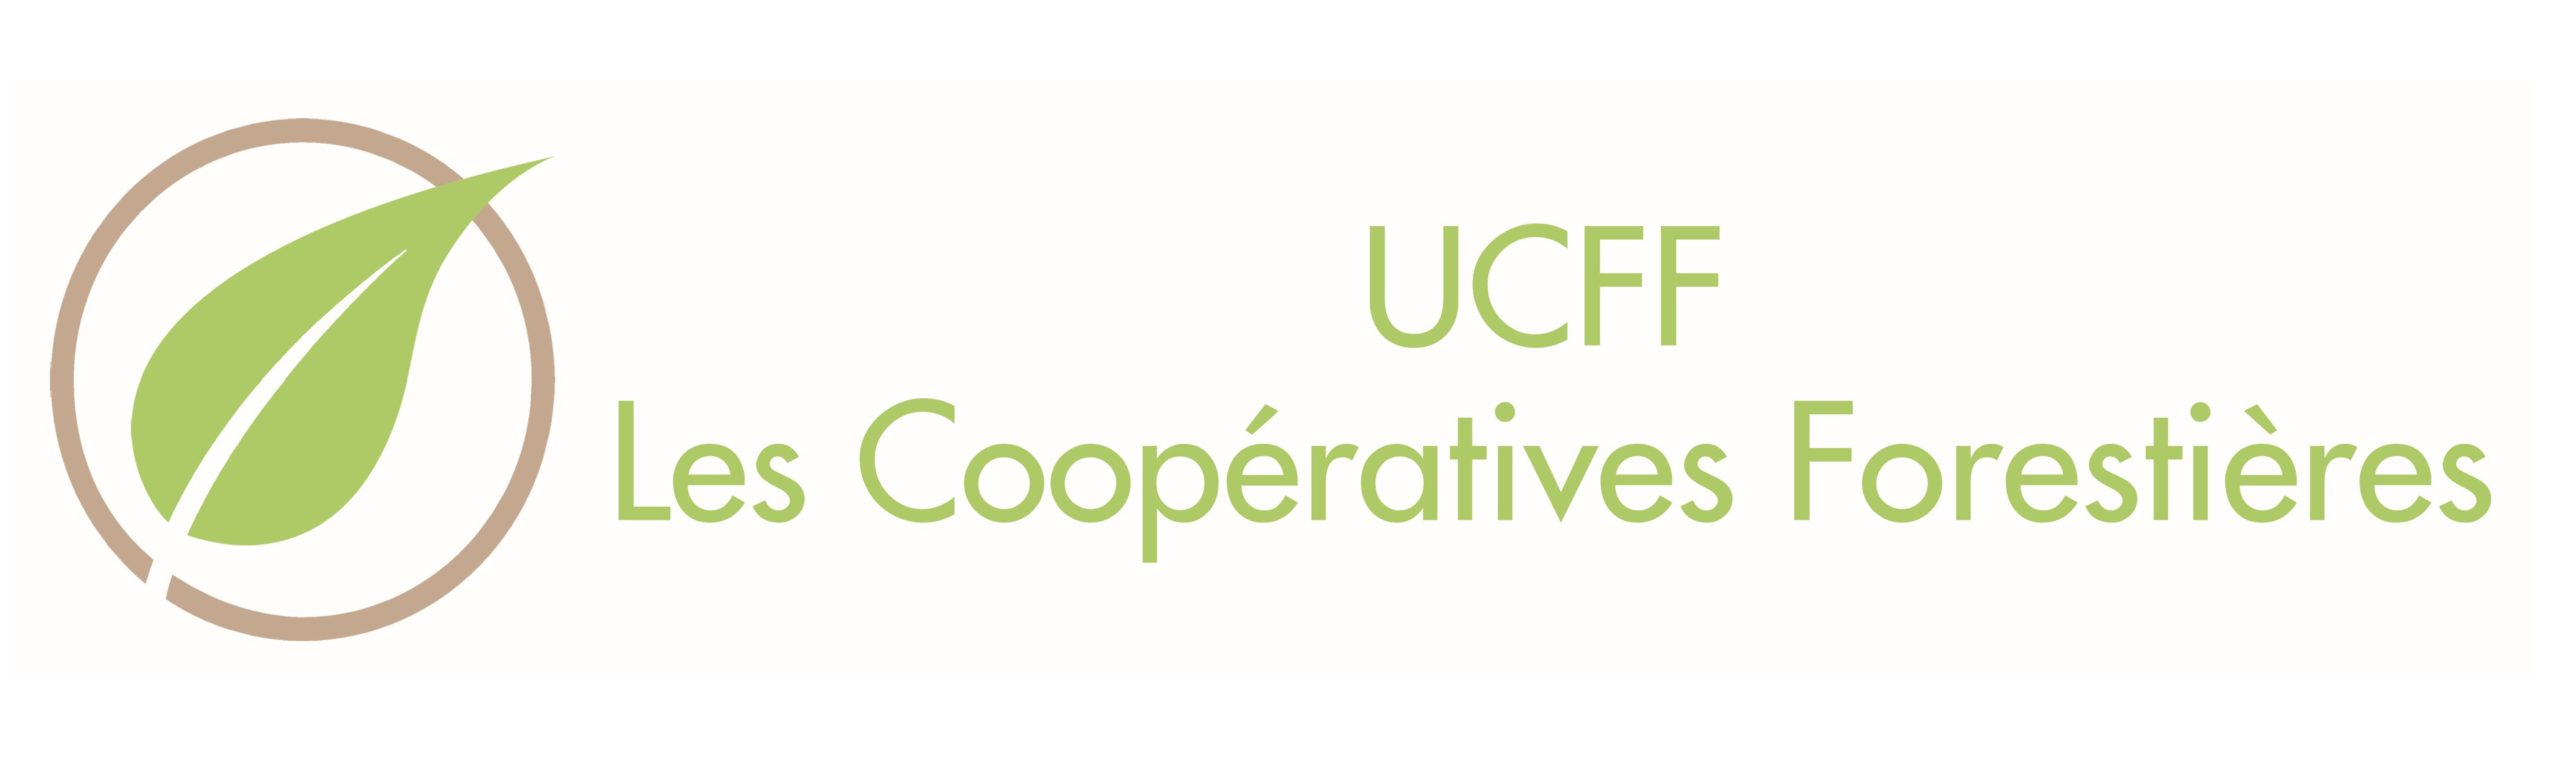 Logo_UCFF-Les_Cooperatives_Forestieres_2022